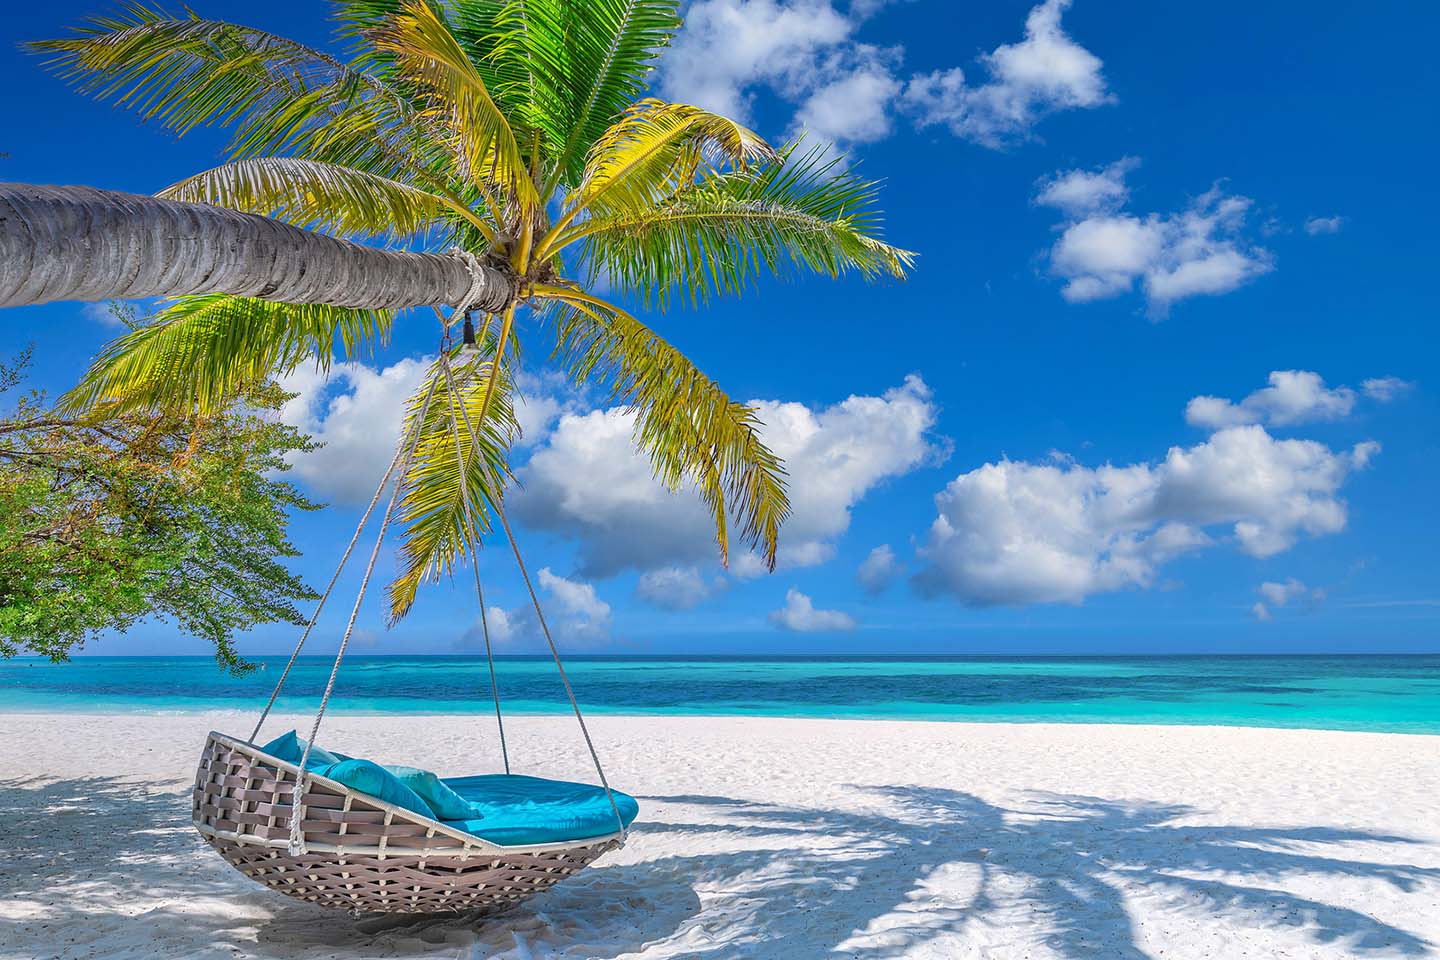 View of a tropical beach. A beach swing hangs in the shadow of a palm tree.